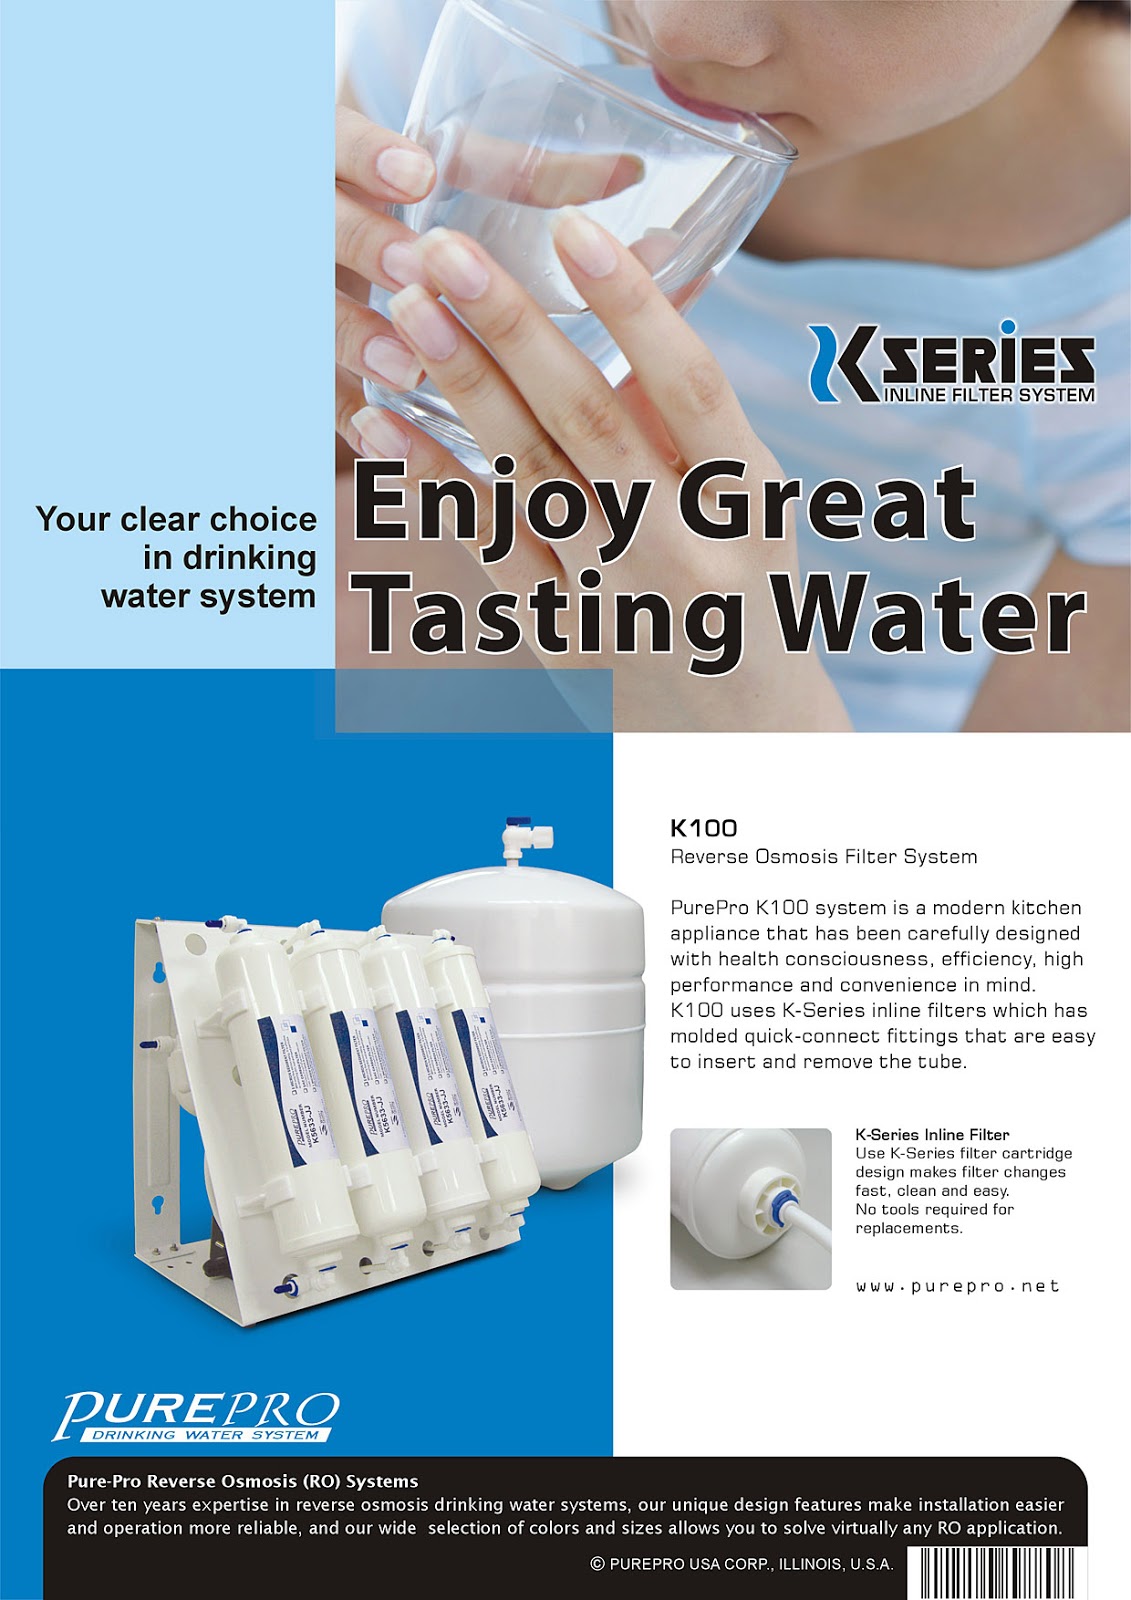 PurePro® K100 Reverse Osmosis Water Filtration System